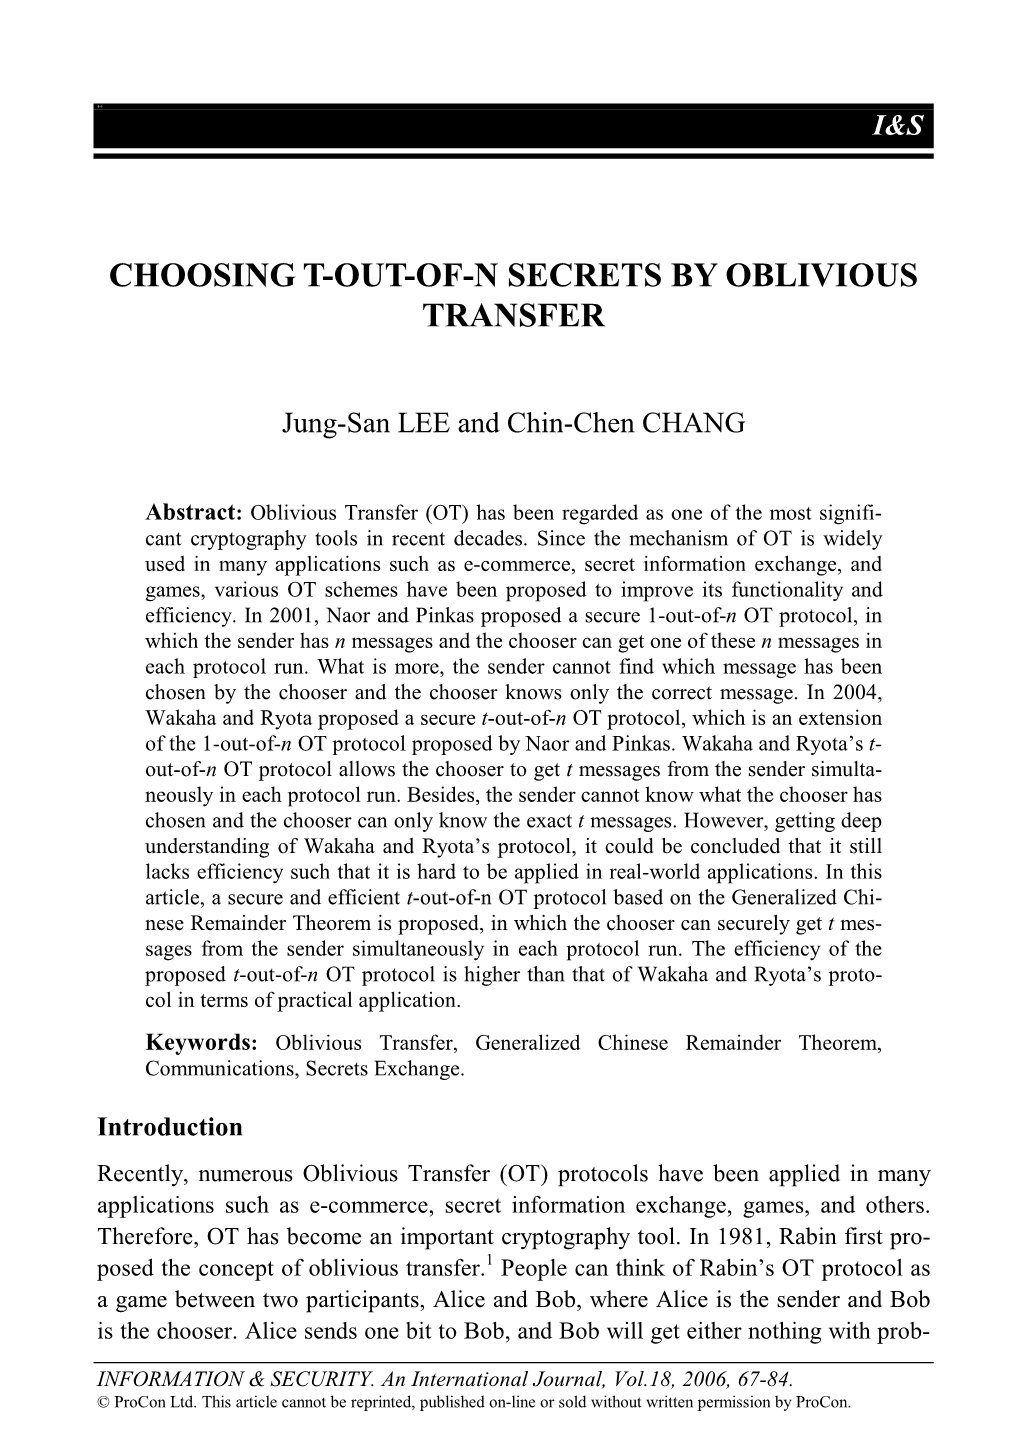 Choosing T-Out-Of-N Secrets by Oblivious Transfer